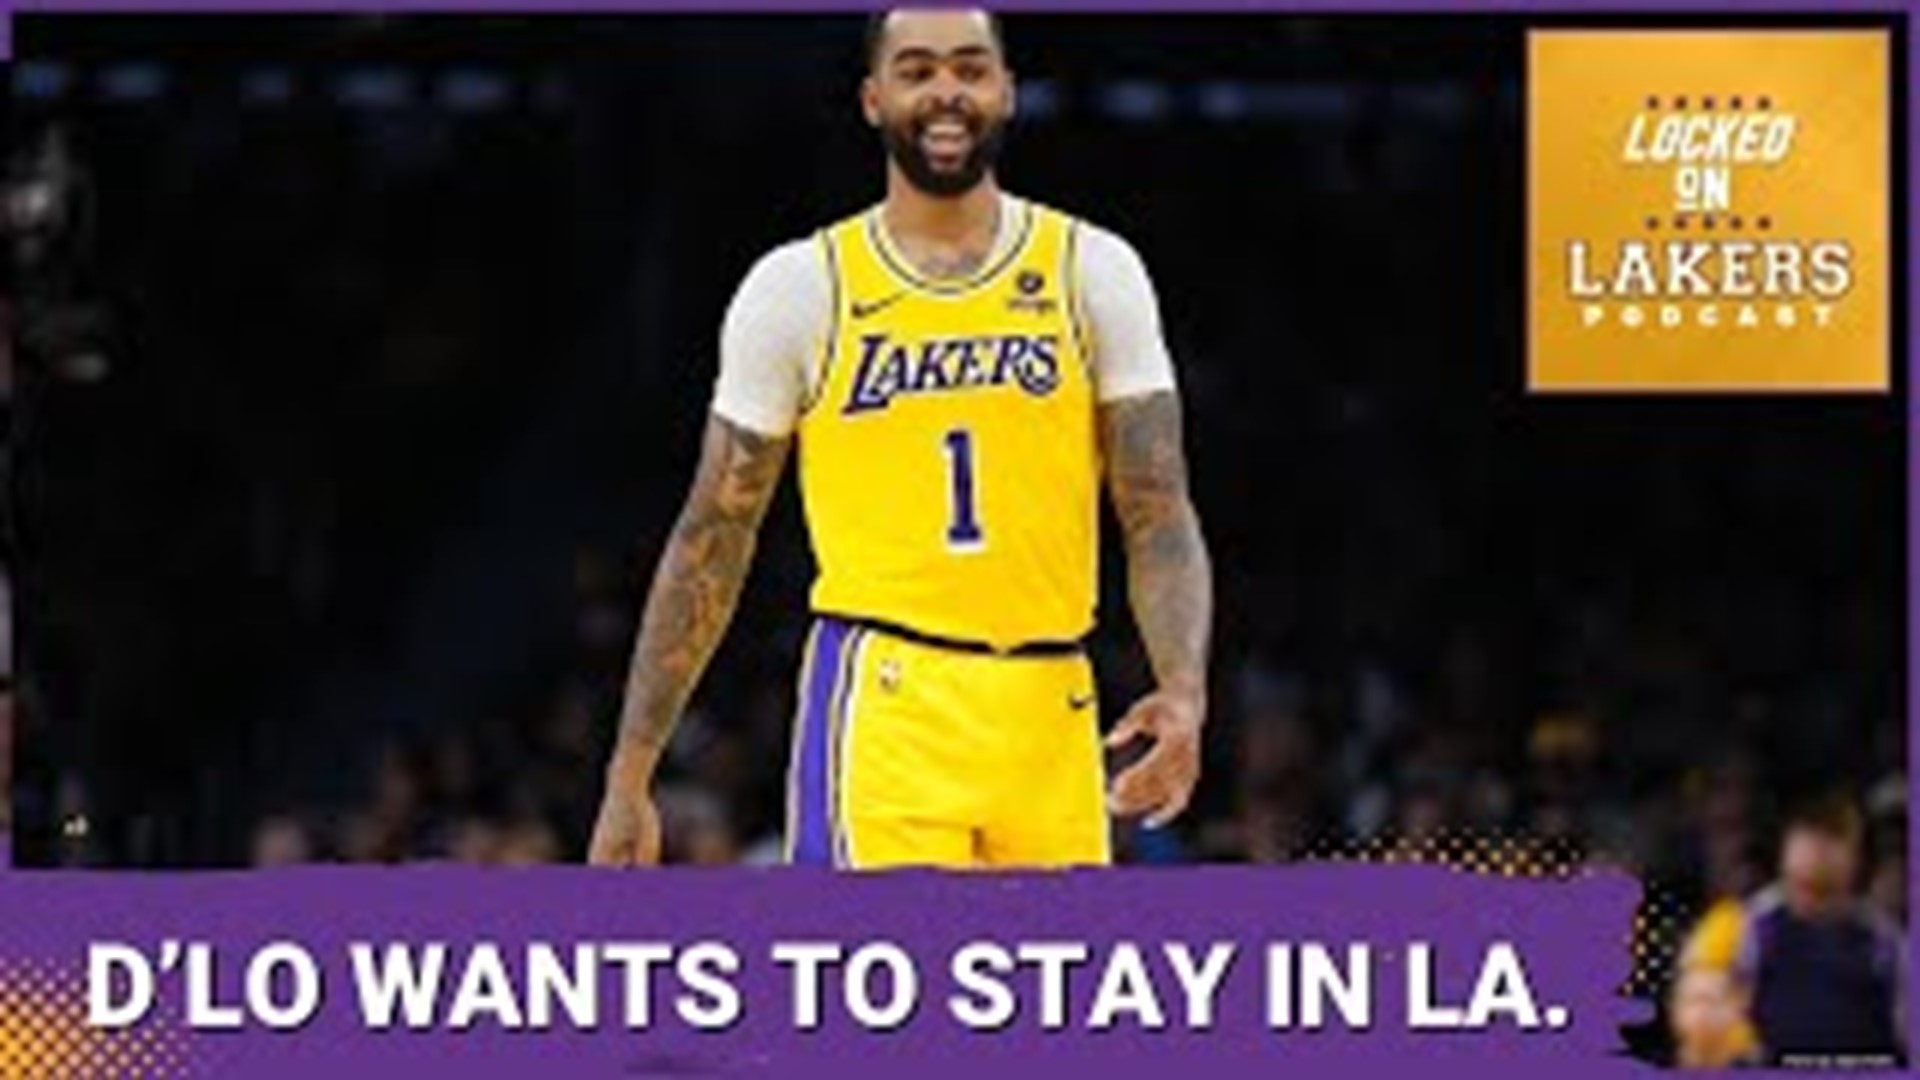 Some interesting news of late for the Lakers ahead of the third game of a thus-far undefeated road trip.